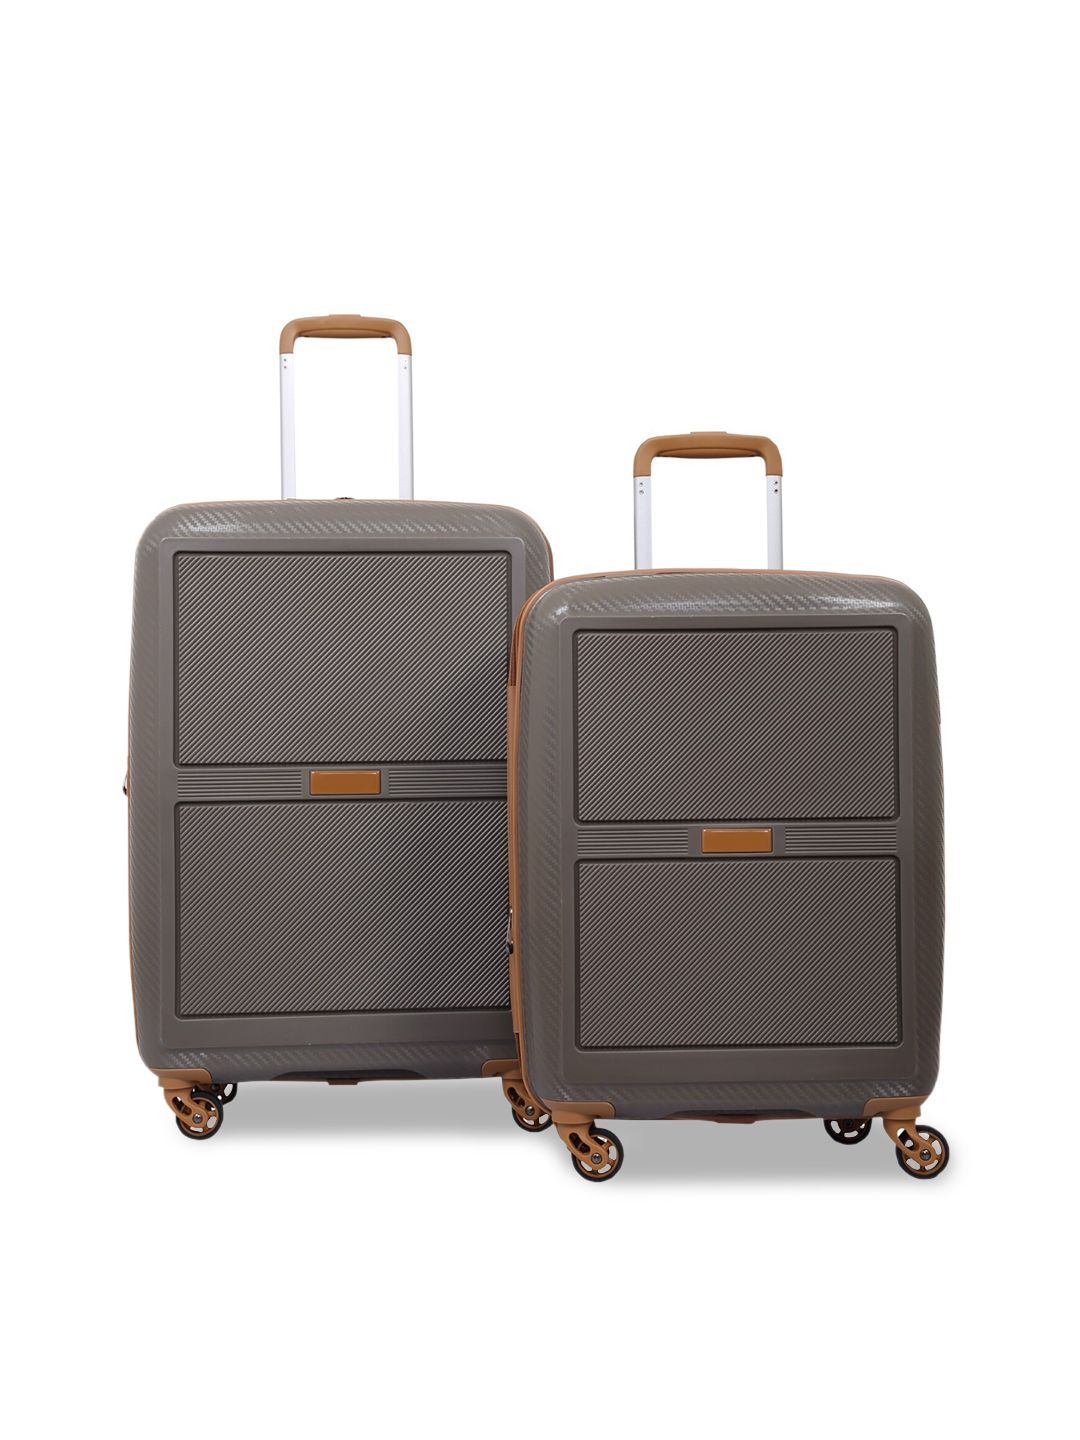 Polo Class Set of 2 Brown Solid Hard Sided Trolley Suitcase- 24 & 28 inch Price in India